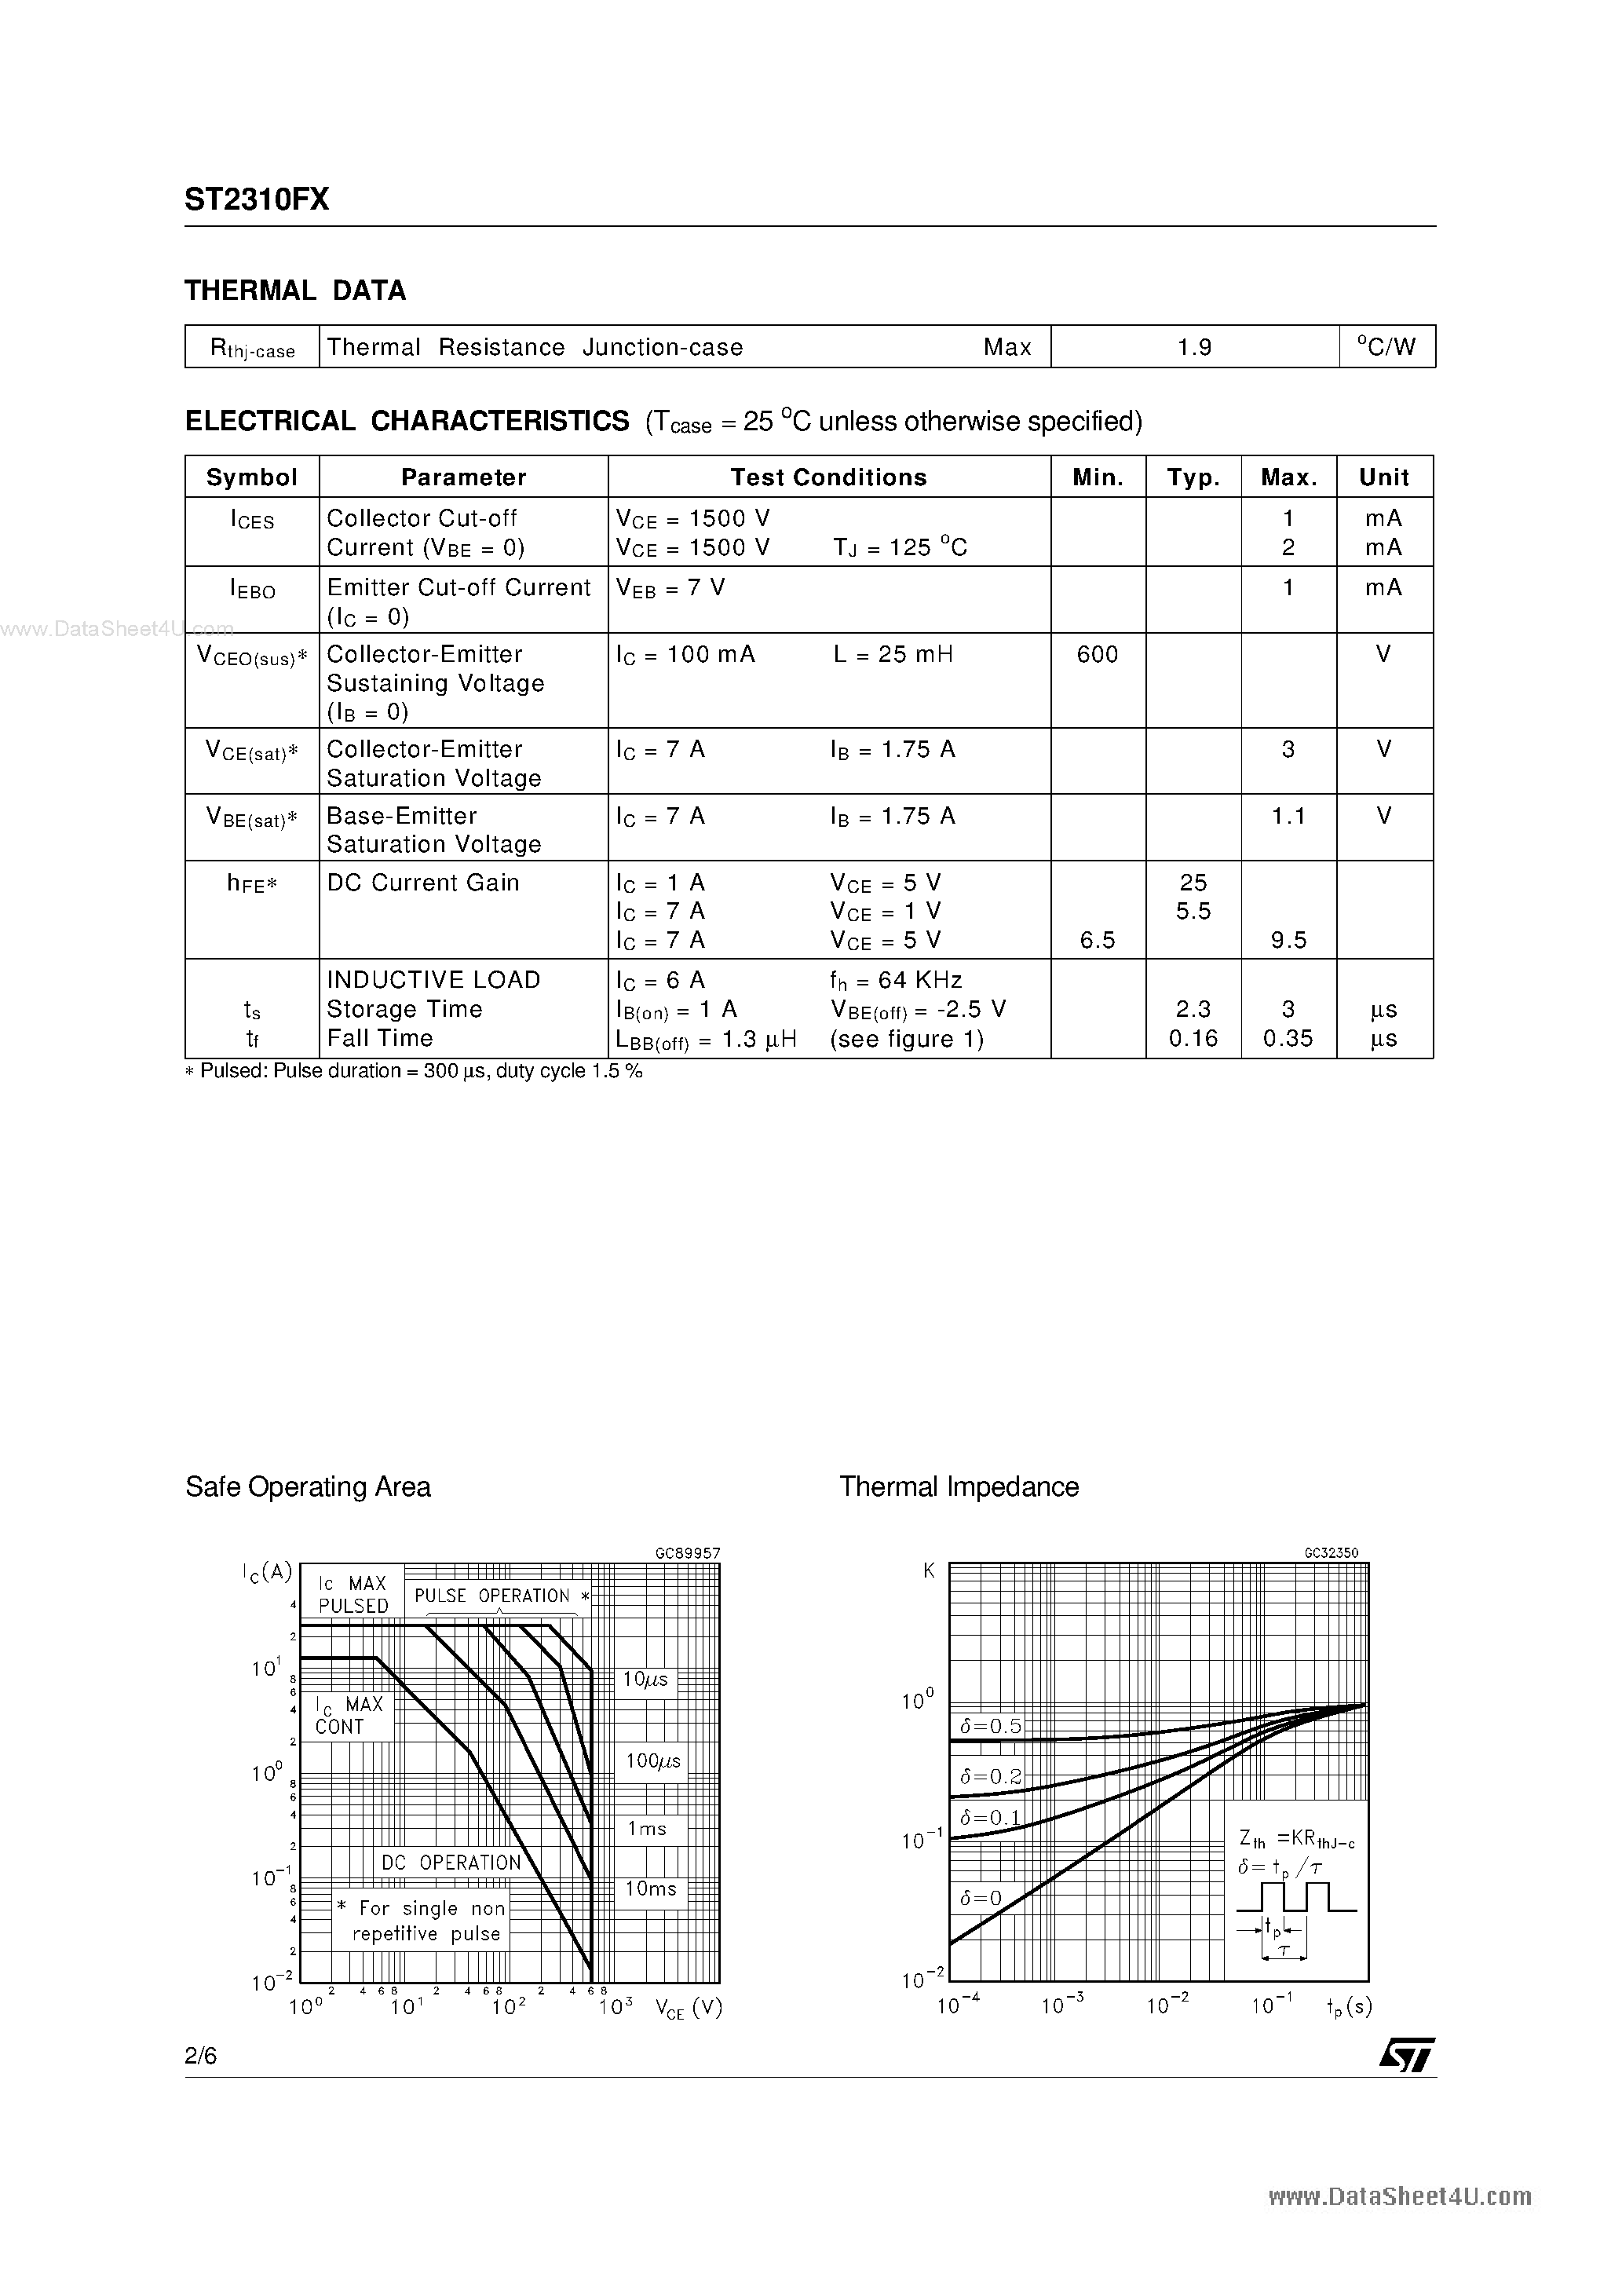 Datasheet 2310FX - Search -----> ST2310FX page 2